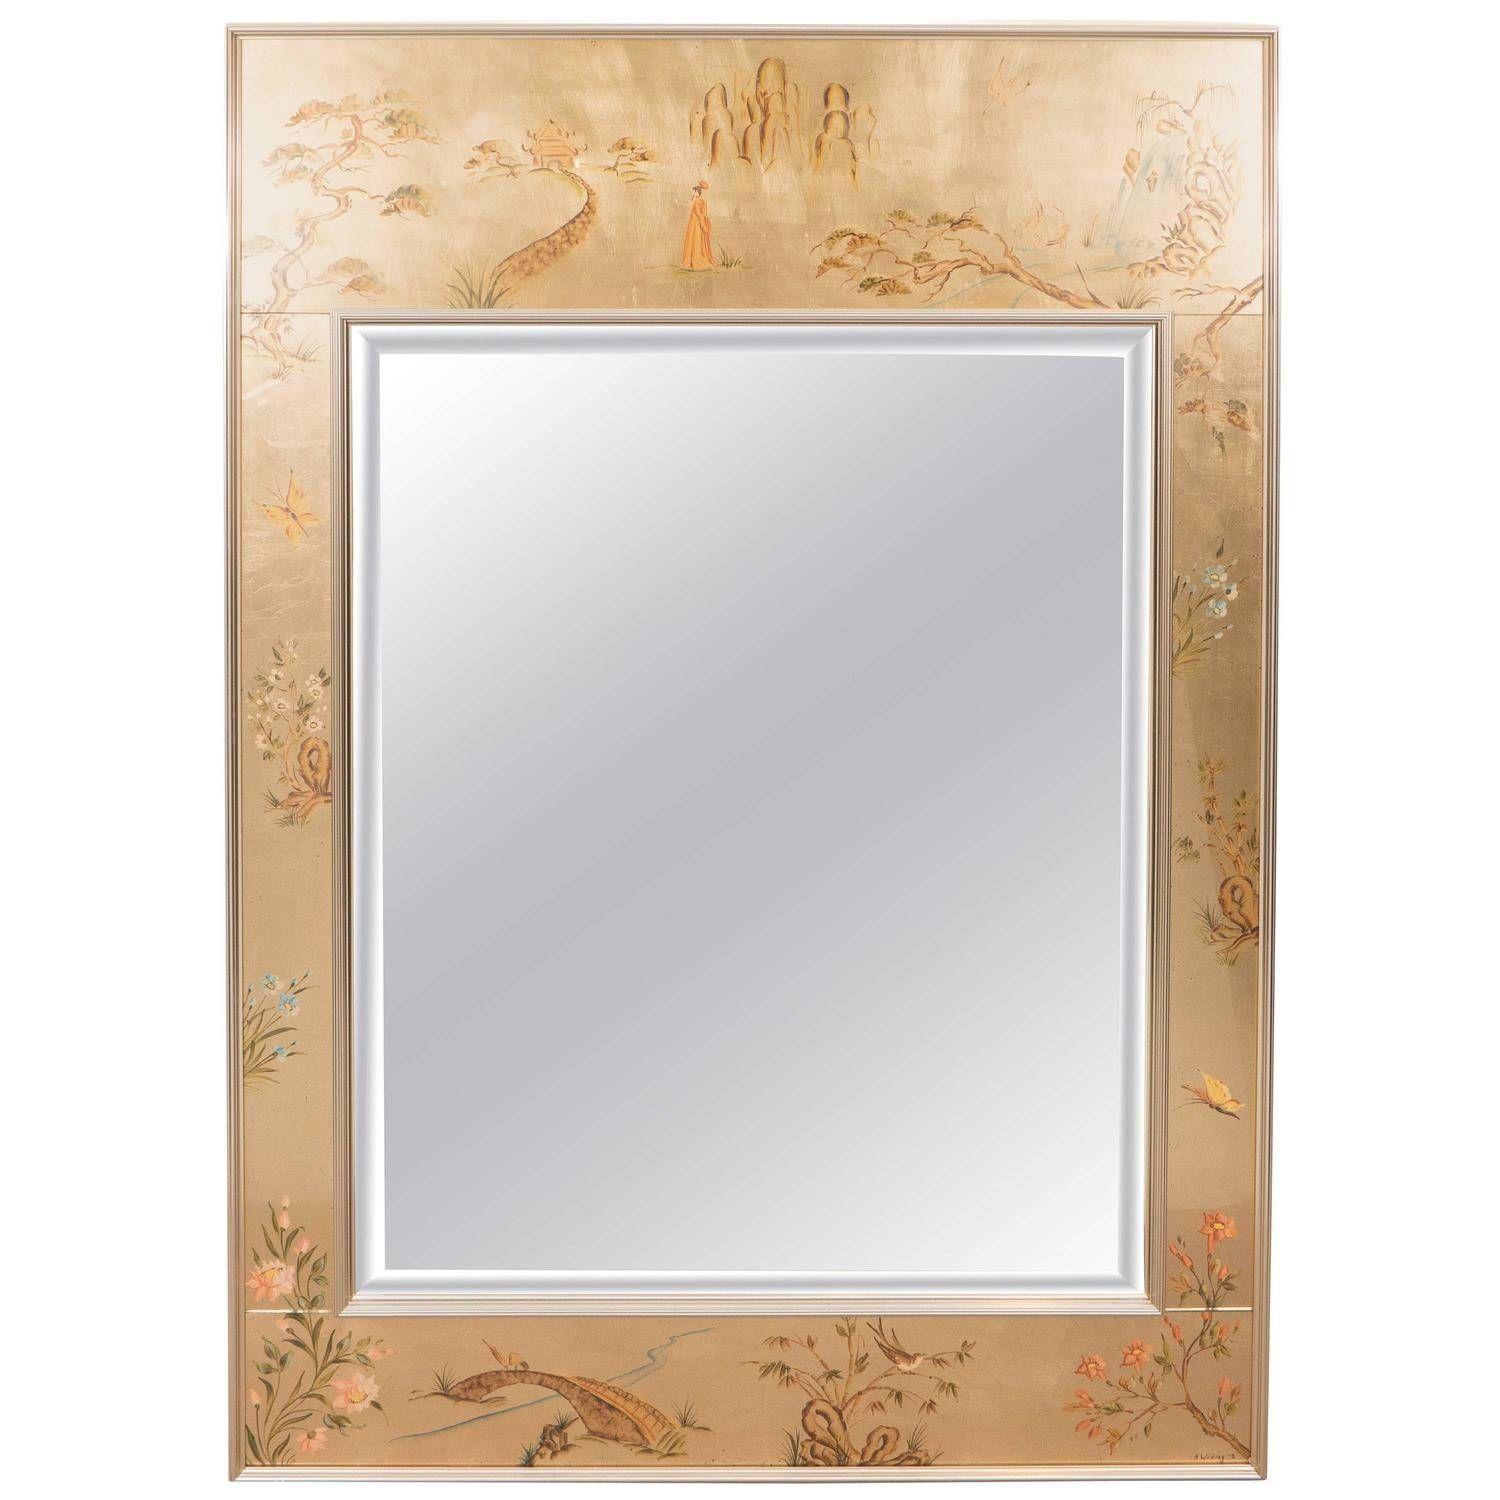 Labarge Mirrors – 55 For Sale At 1stdibs Throughout Antique Looking Mirrors (View 19 of 25)